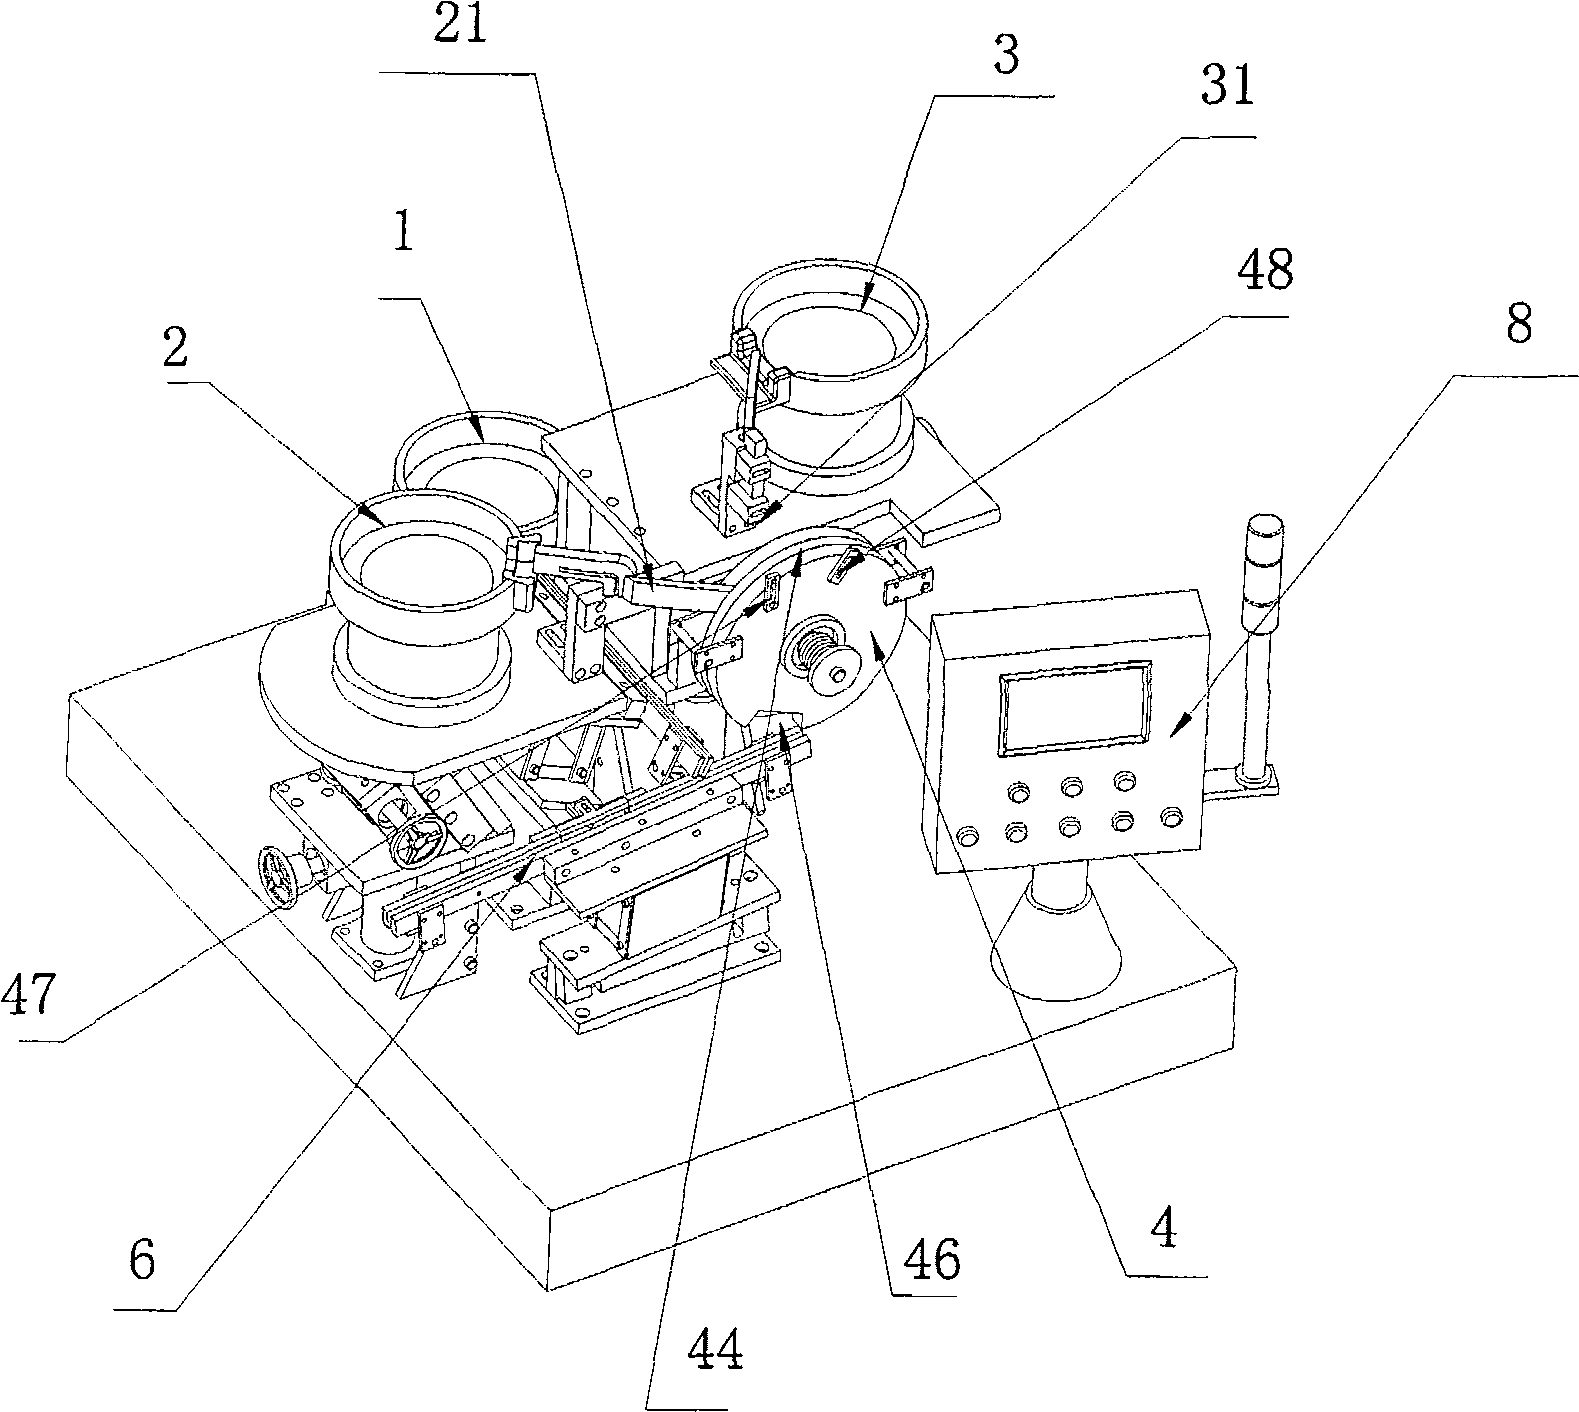 Automatic screw and filling piece compounding device